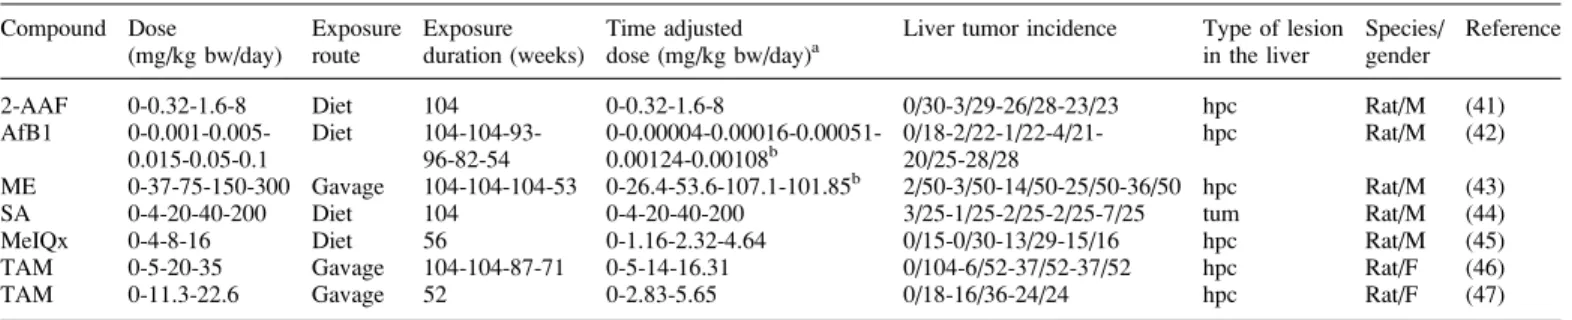 Table II. Published tumour incidence data, including dose, exposure route, exposure duration (w 5 weeks, m 5 months), the dose adjusted to 2 years of duration and exposure, tumour incidences in the liver, type of lesion, species and gender